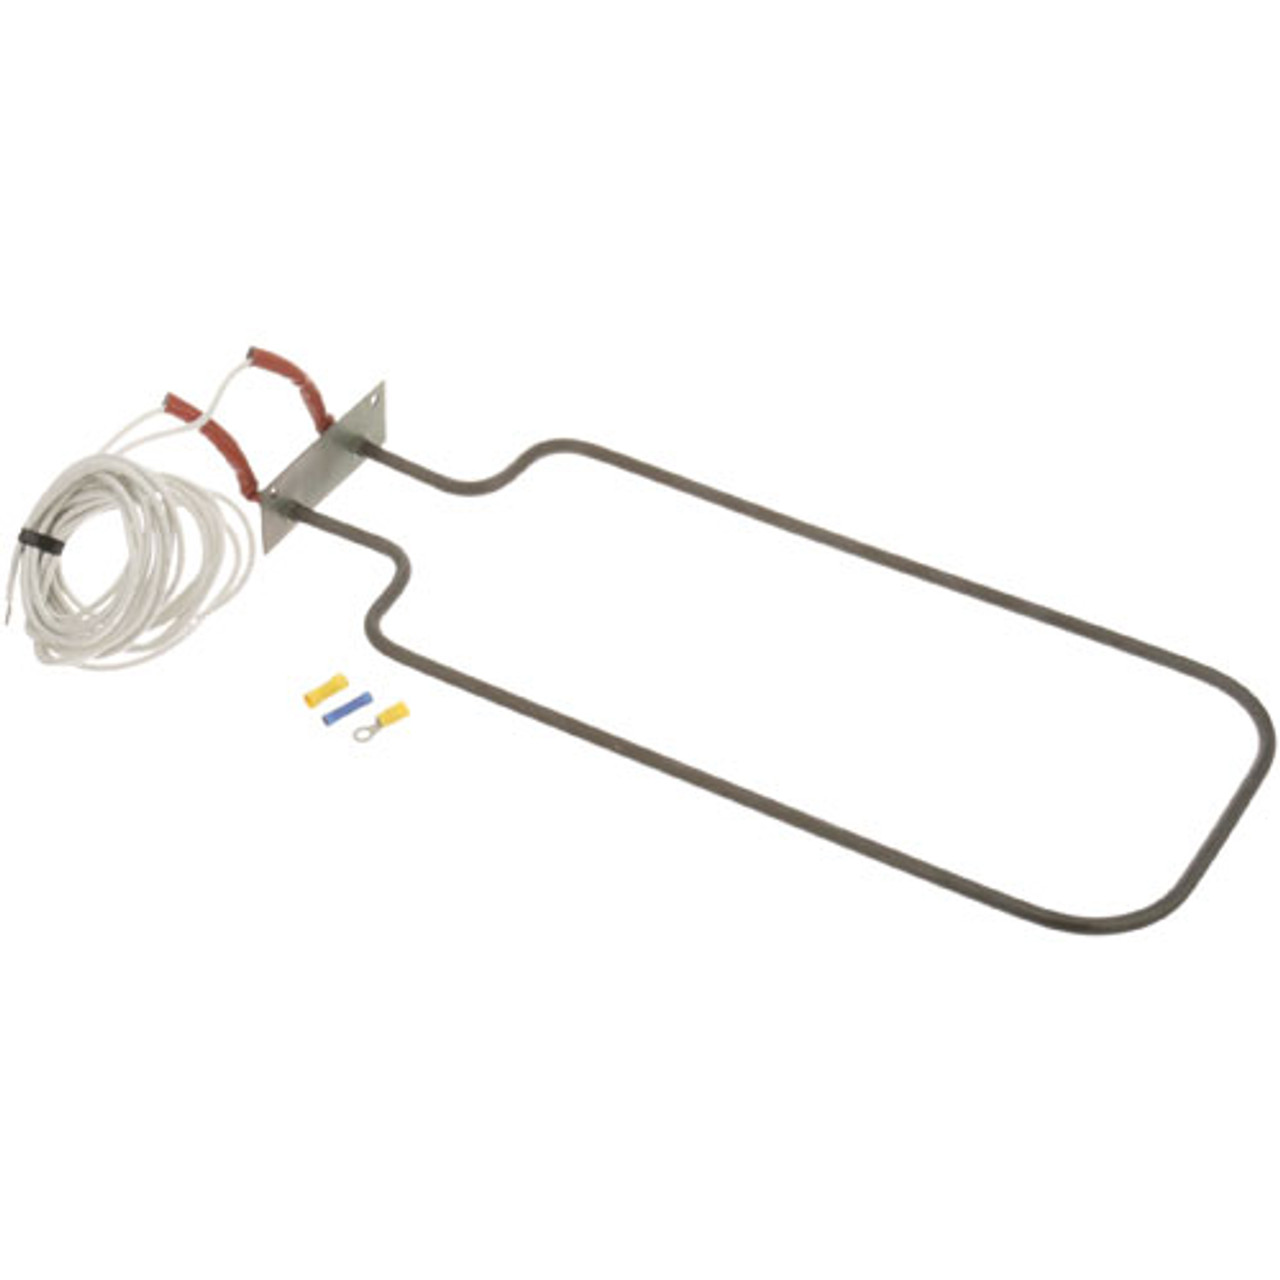 Heating Element - 120V/1Kw - Replacement Part For Wittco WITWP105-1